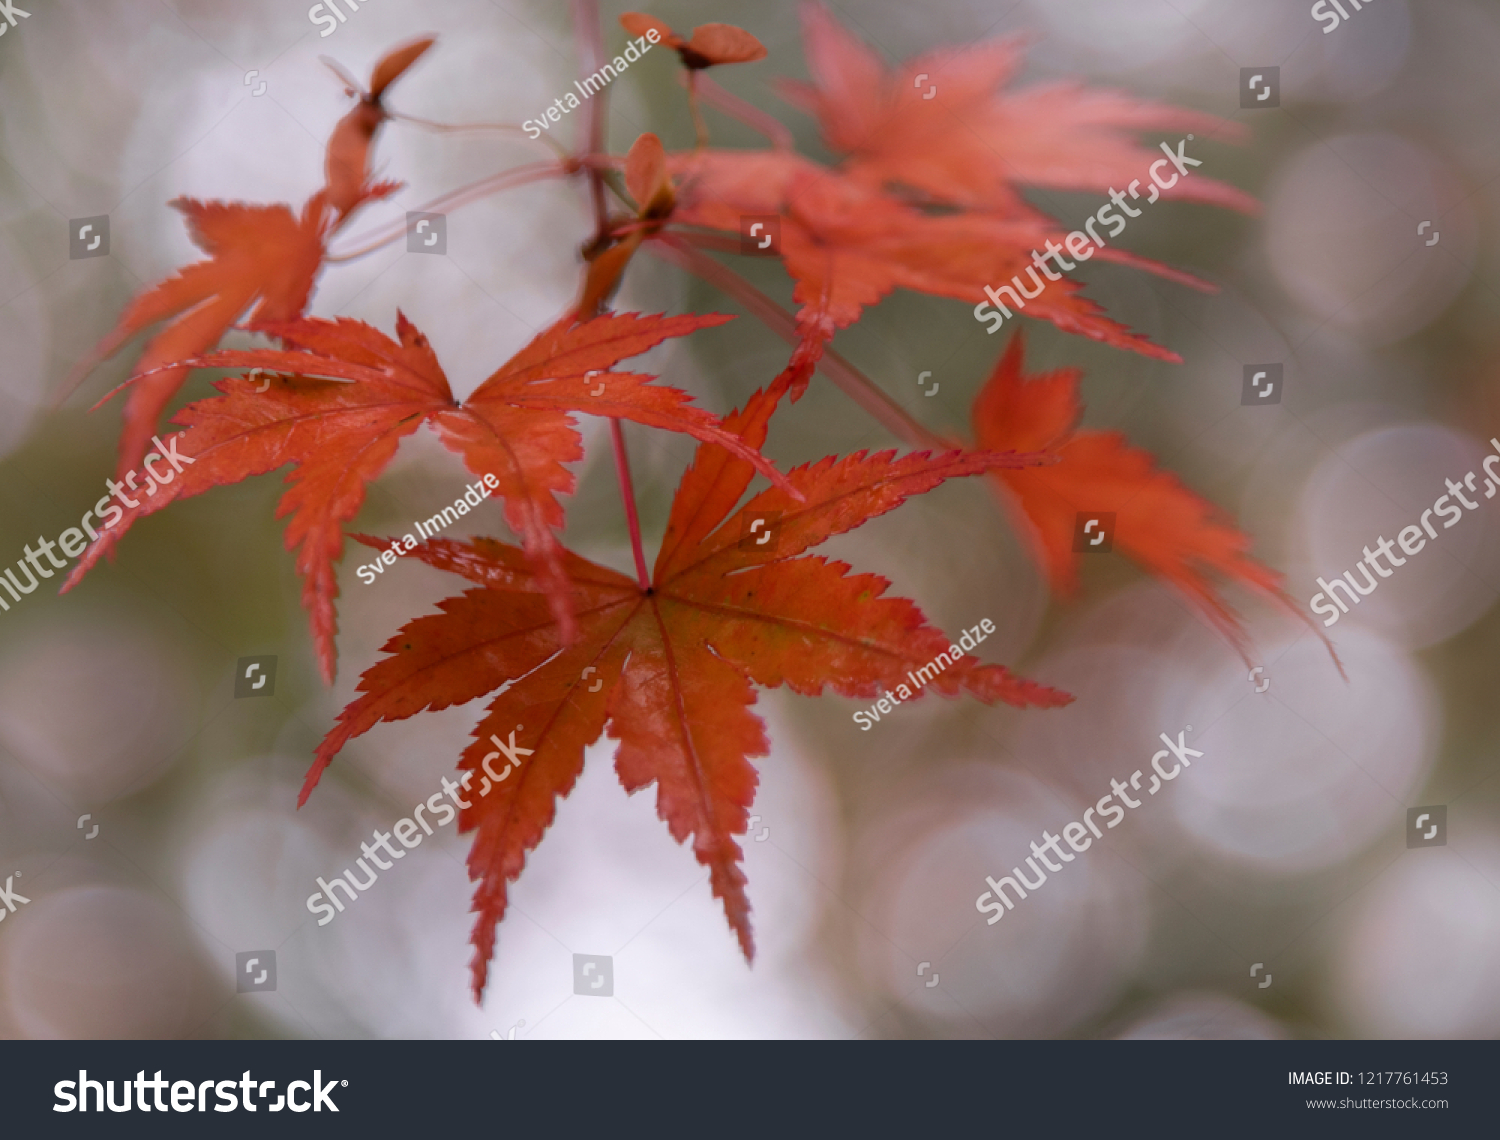 Red leaves from Japanese maple tree. #1217761453